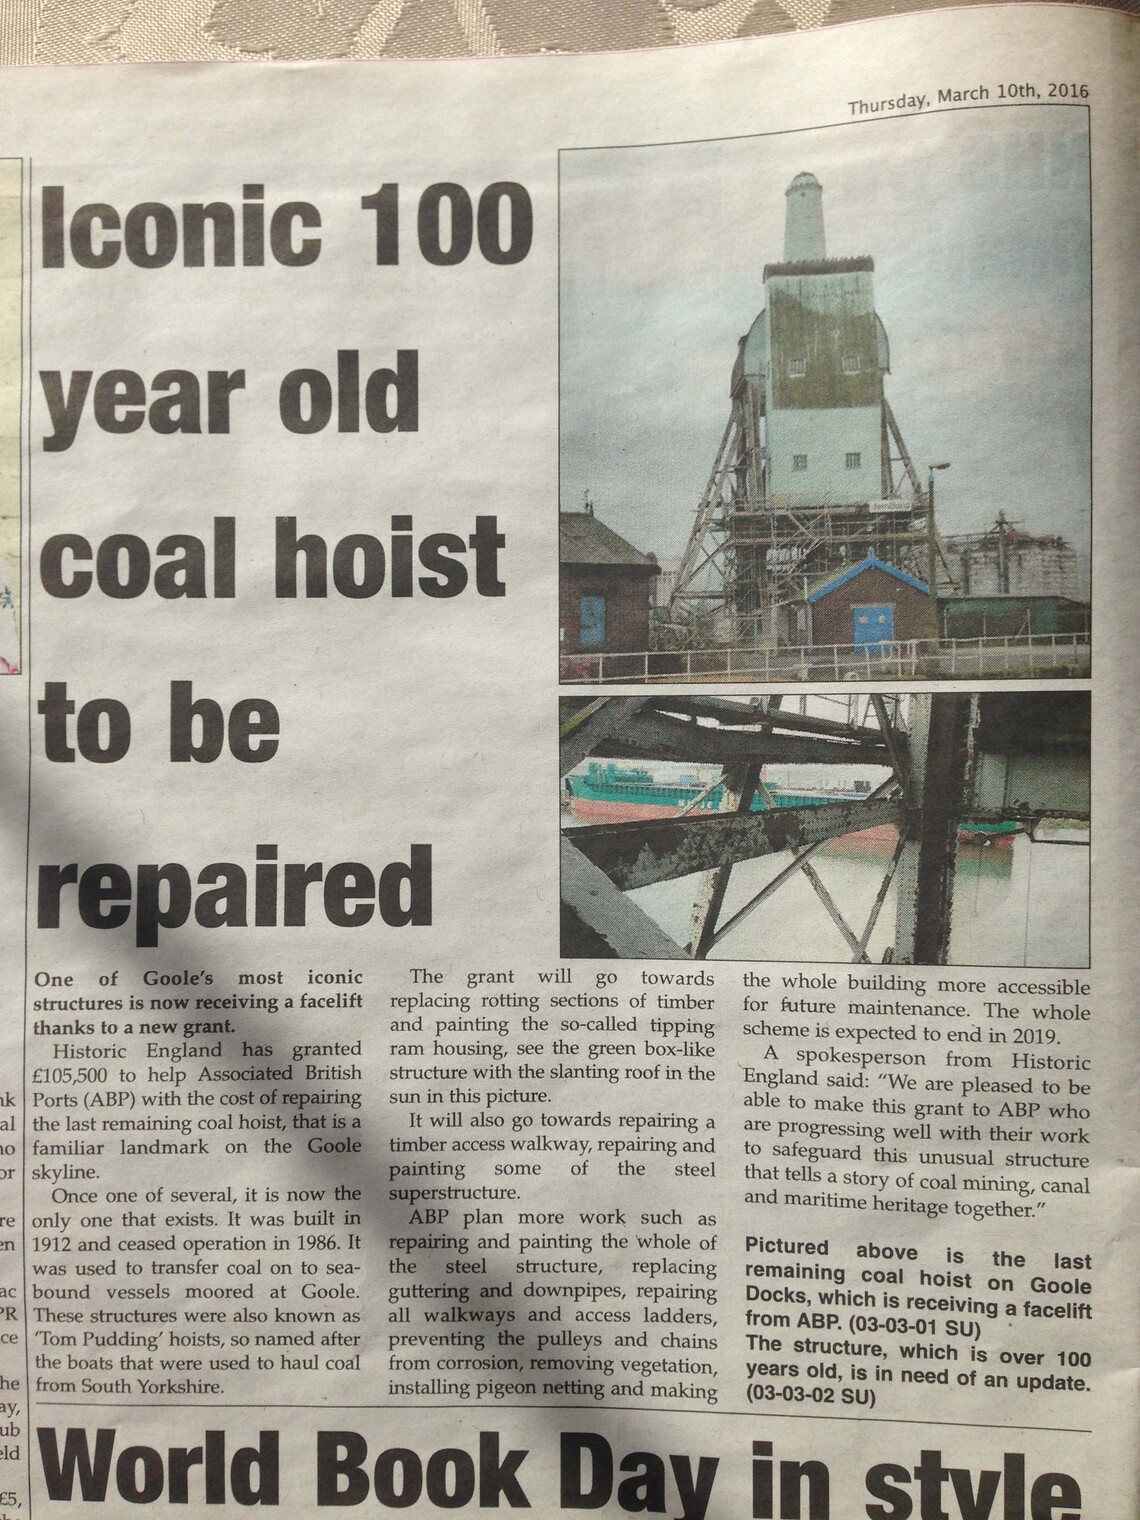 Iconic boat hoist to be restored - Goole Times article